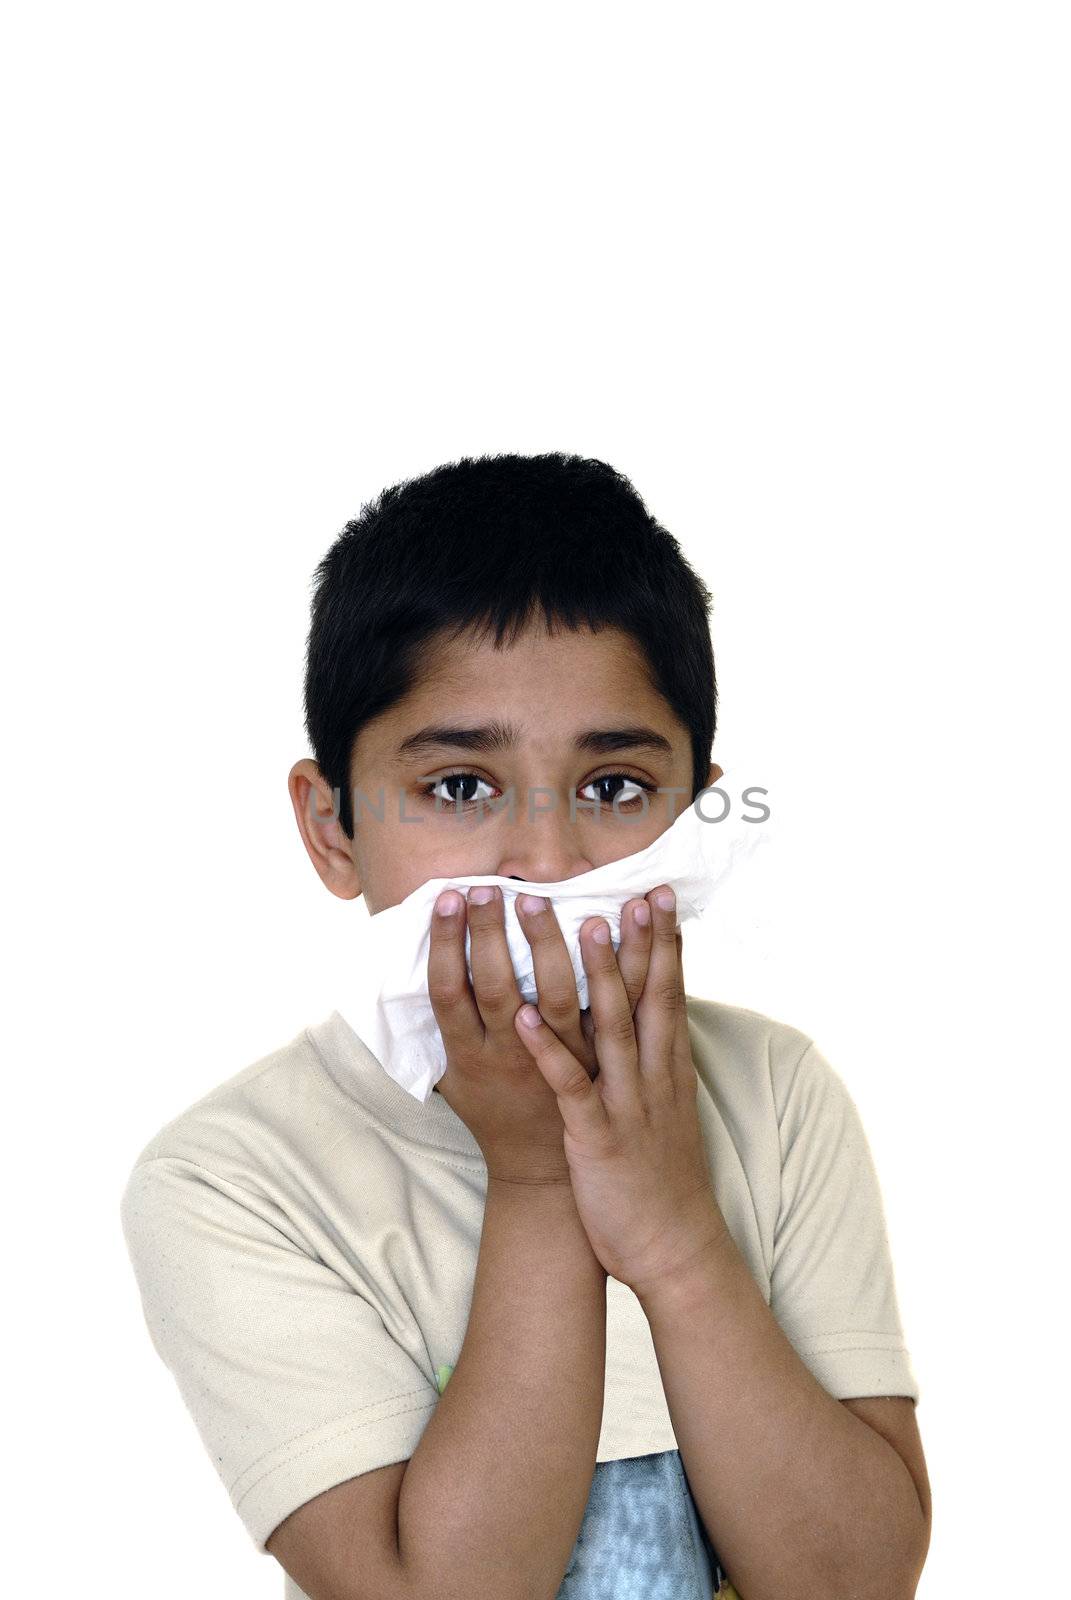 An handsome Indian kid wiping his face due to an allergy